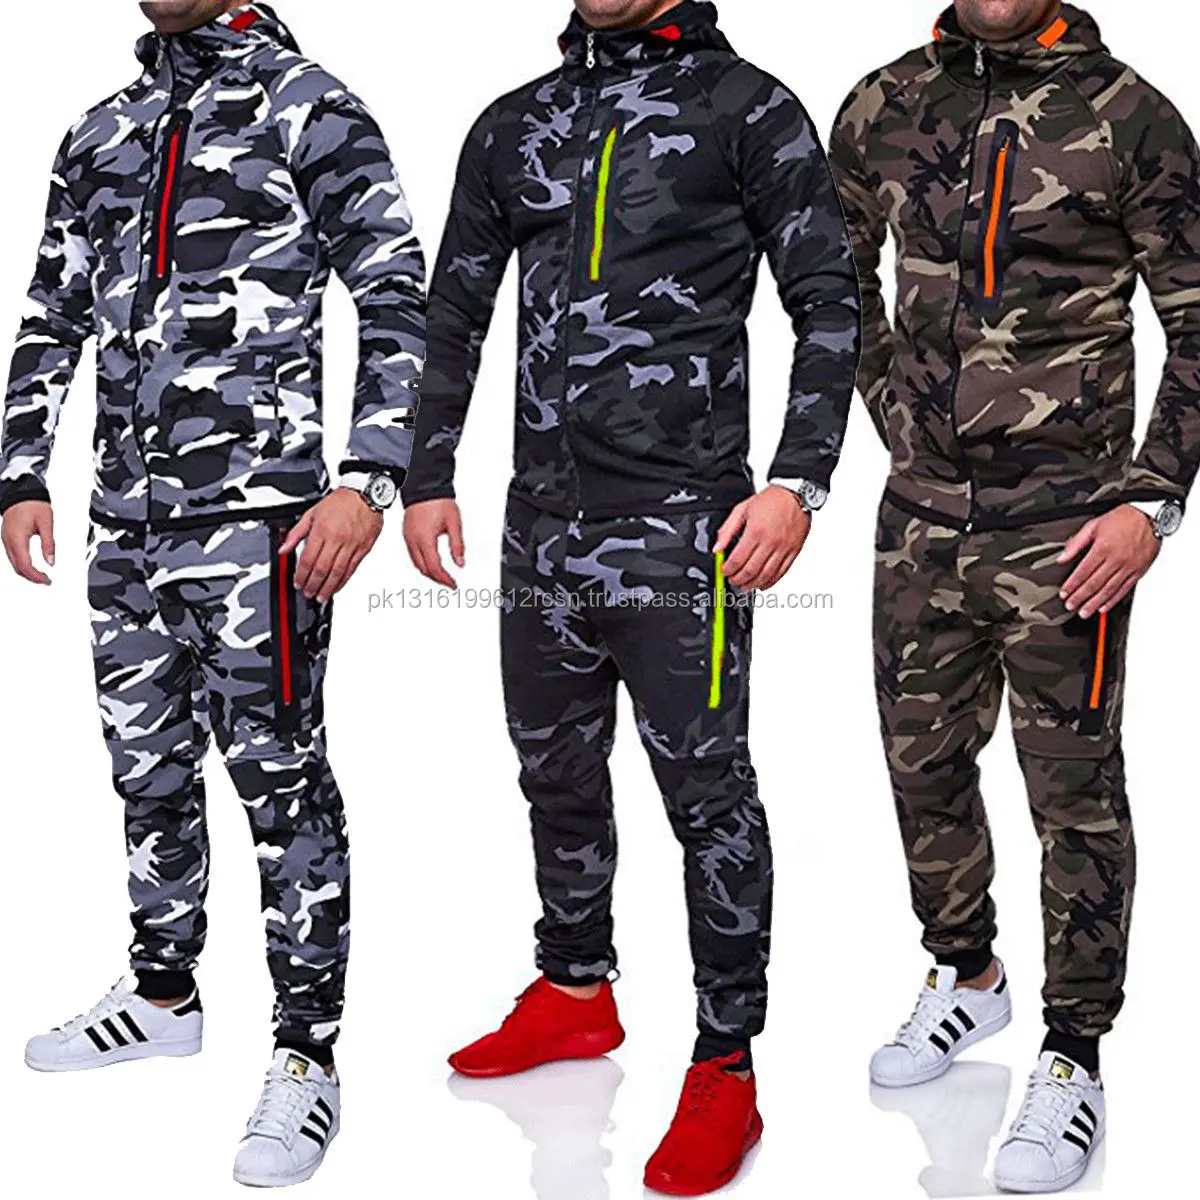 Camouflage Tracksuit / Army Gym Suits - Buy Workout Hoodies And Bottoms ...